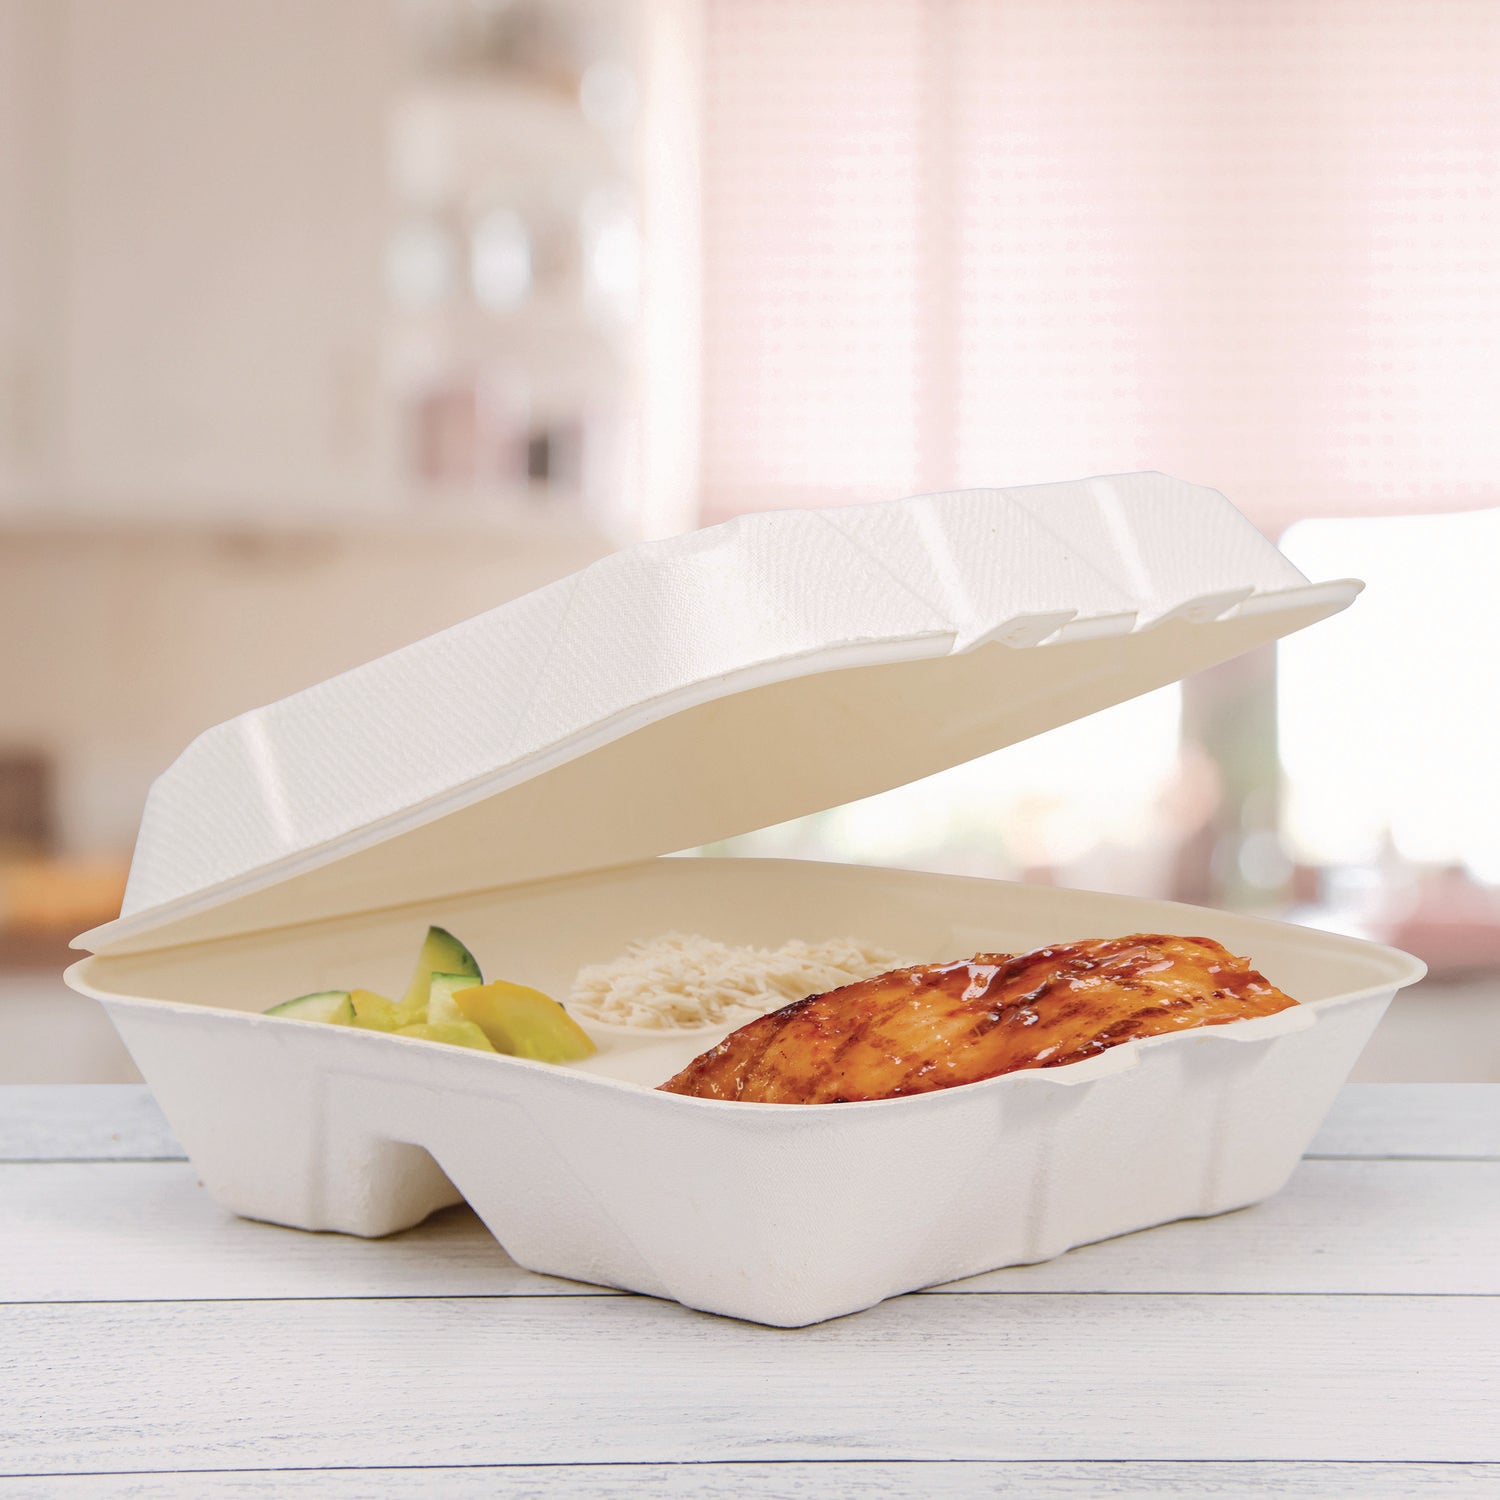 compostable-fiber-hinged-trays-proplanet-seal-3-compartment-925-x-945-x-217-ivory-molded-fiber-200-carton_dcchc9fbr3 - 6